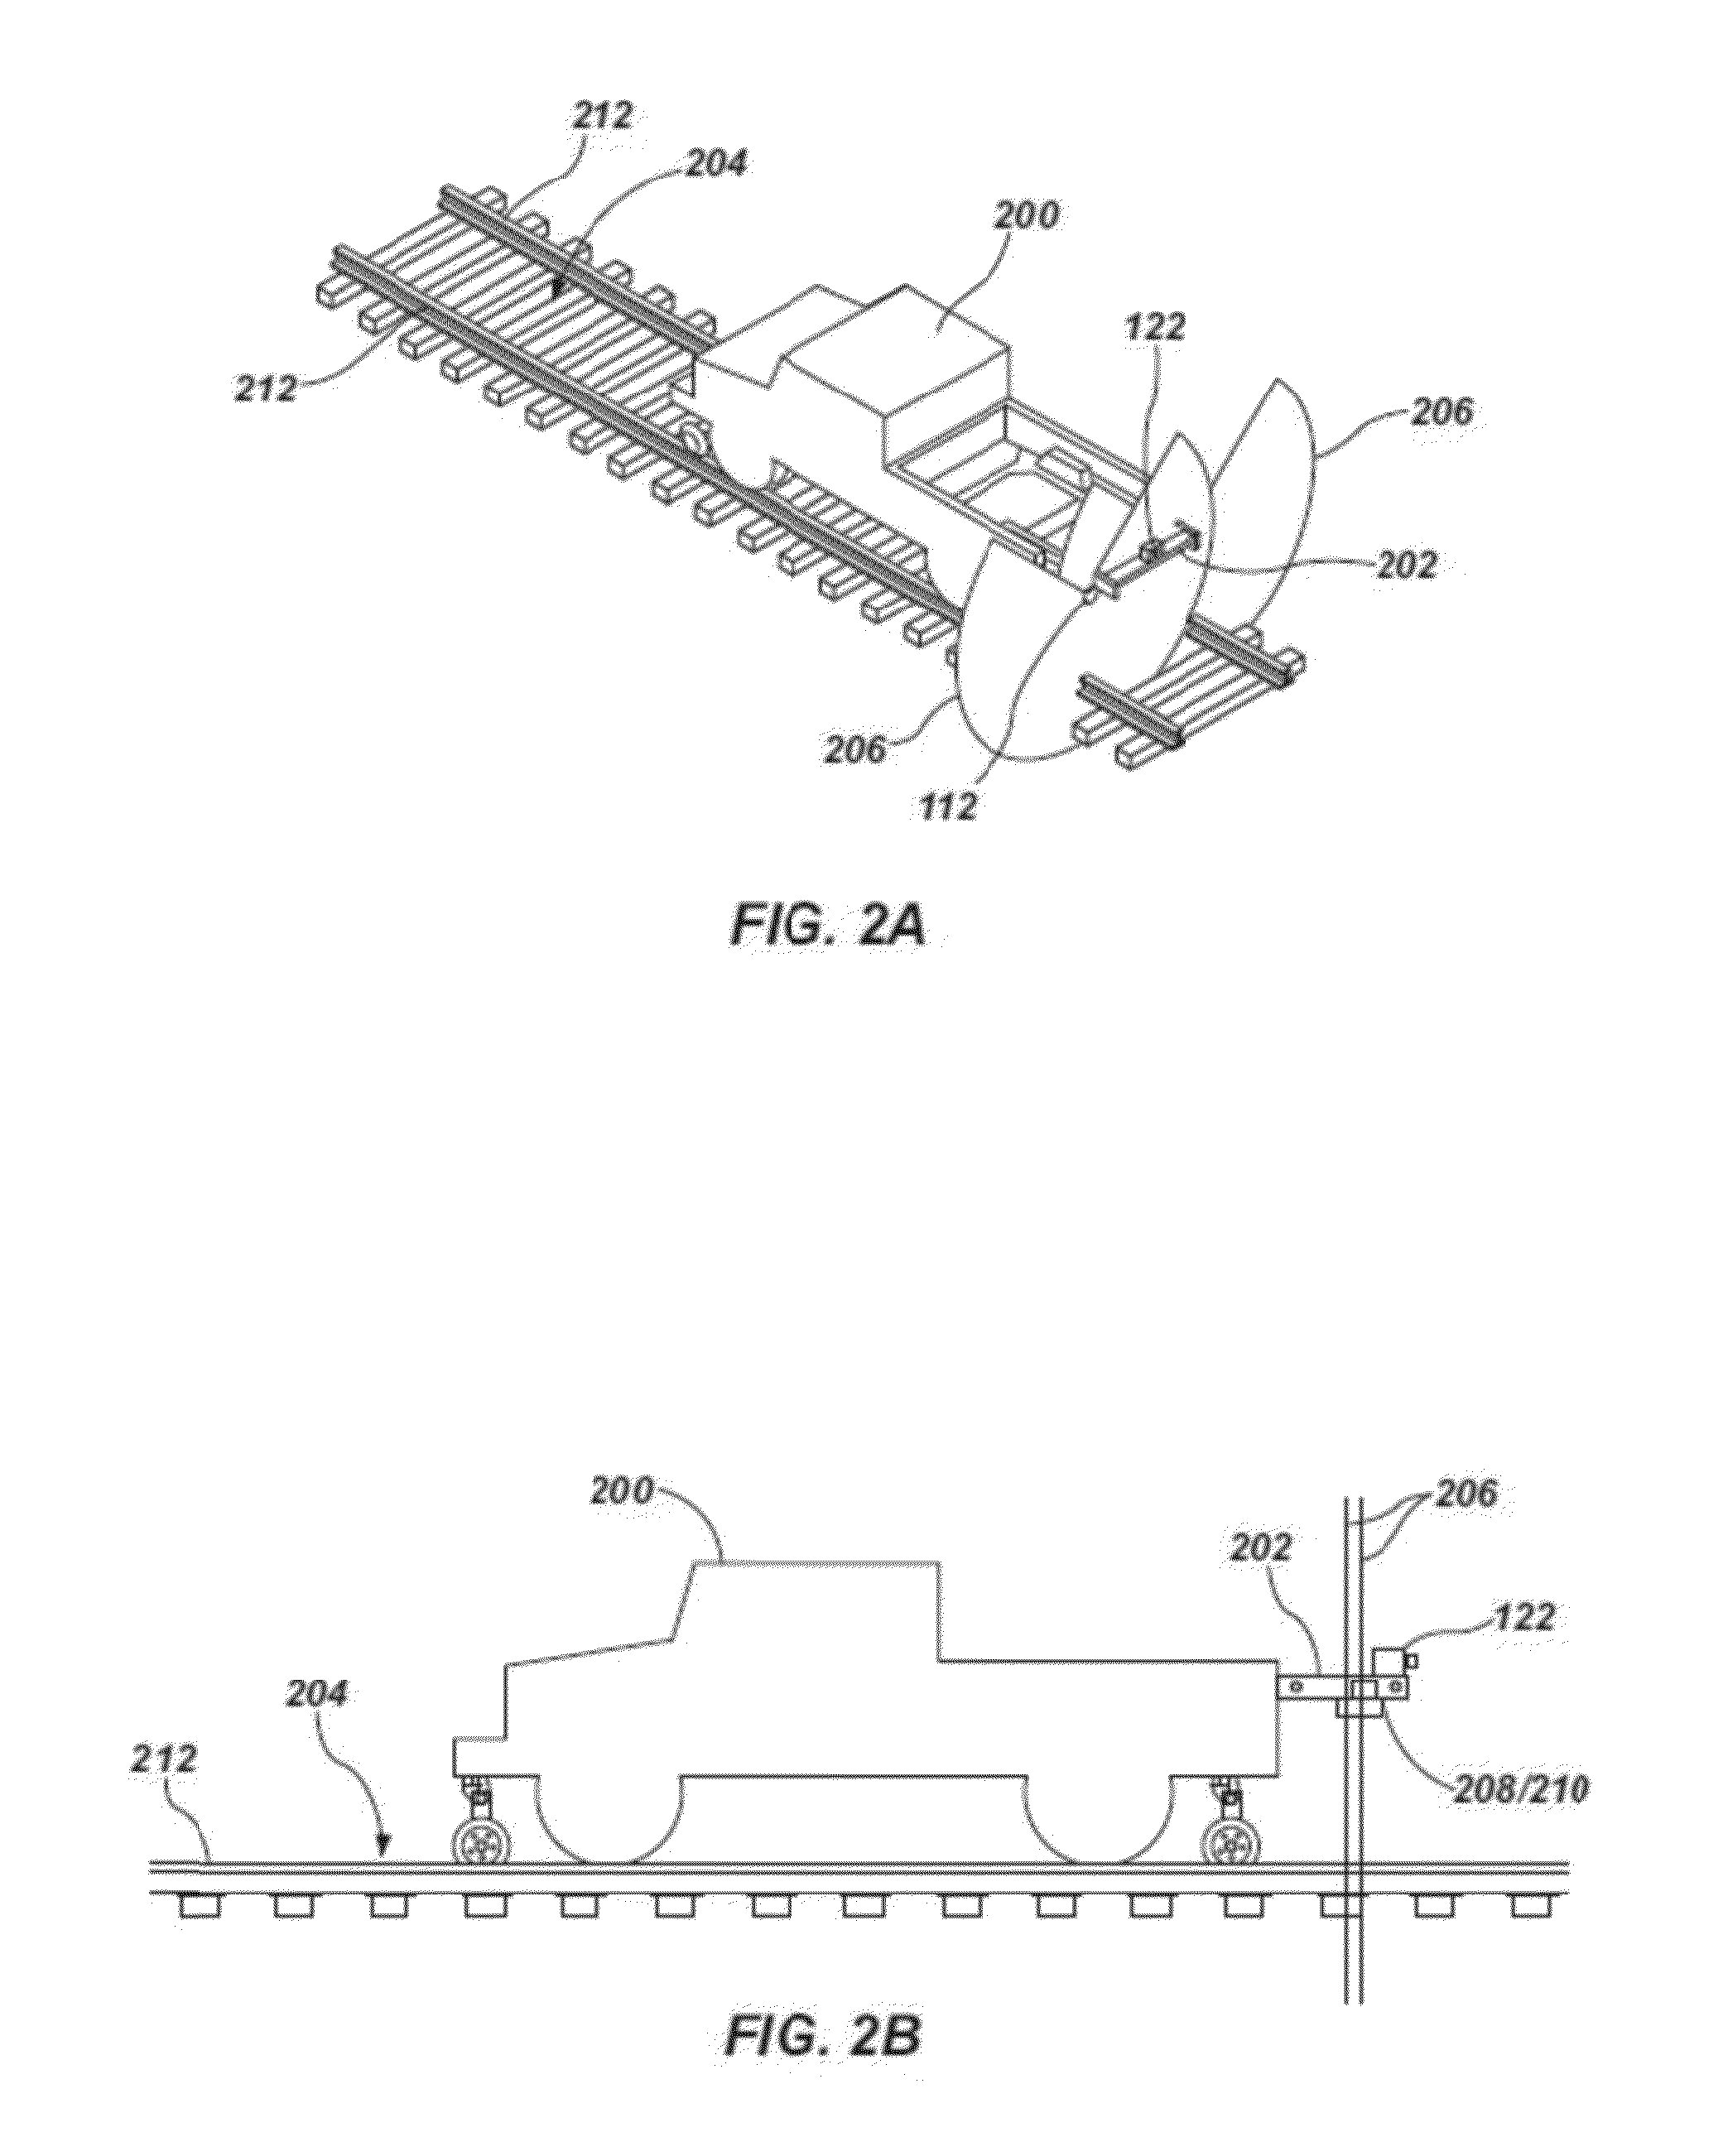 Ballast delivery and computation system and method